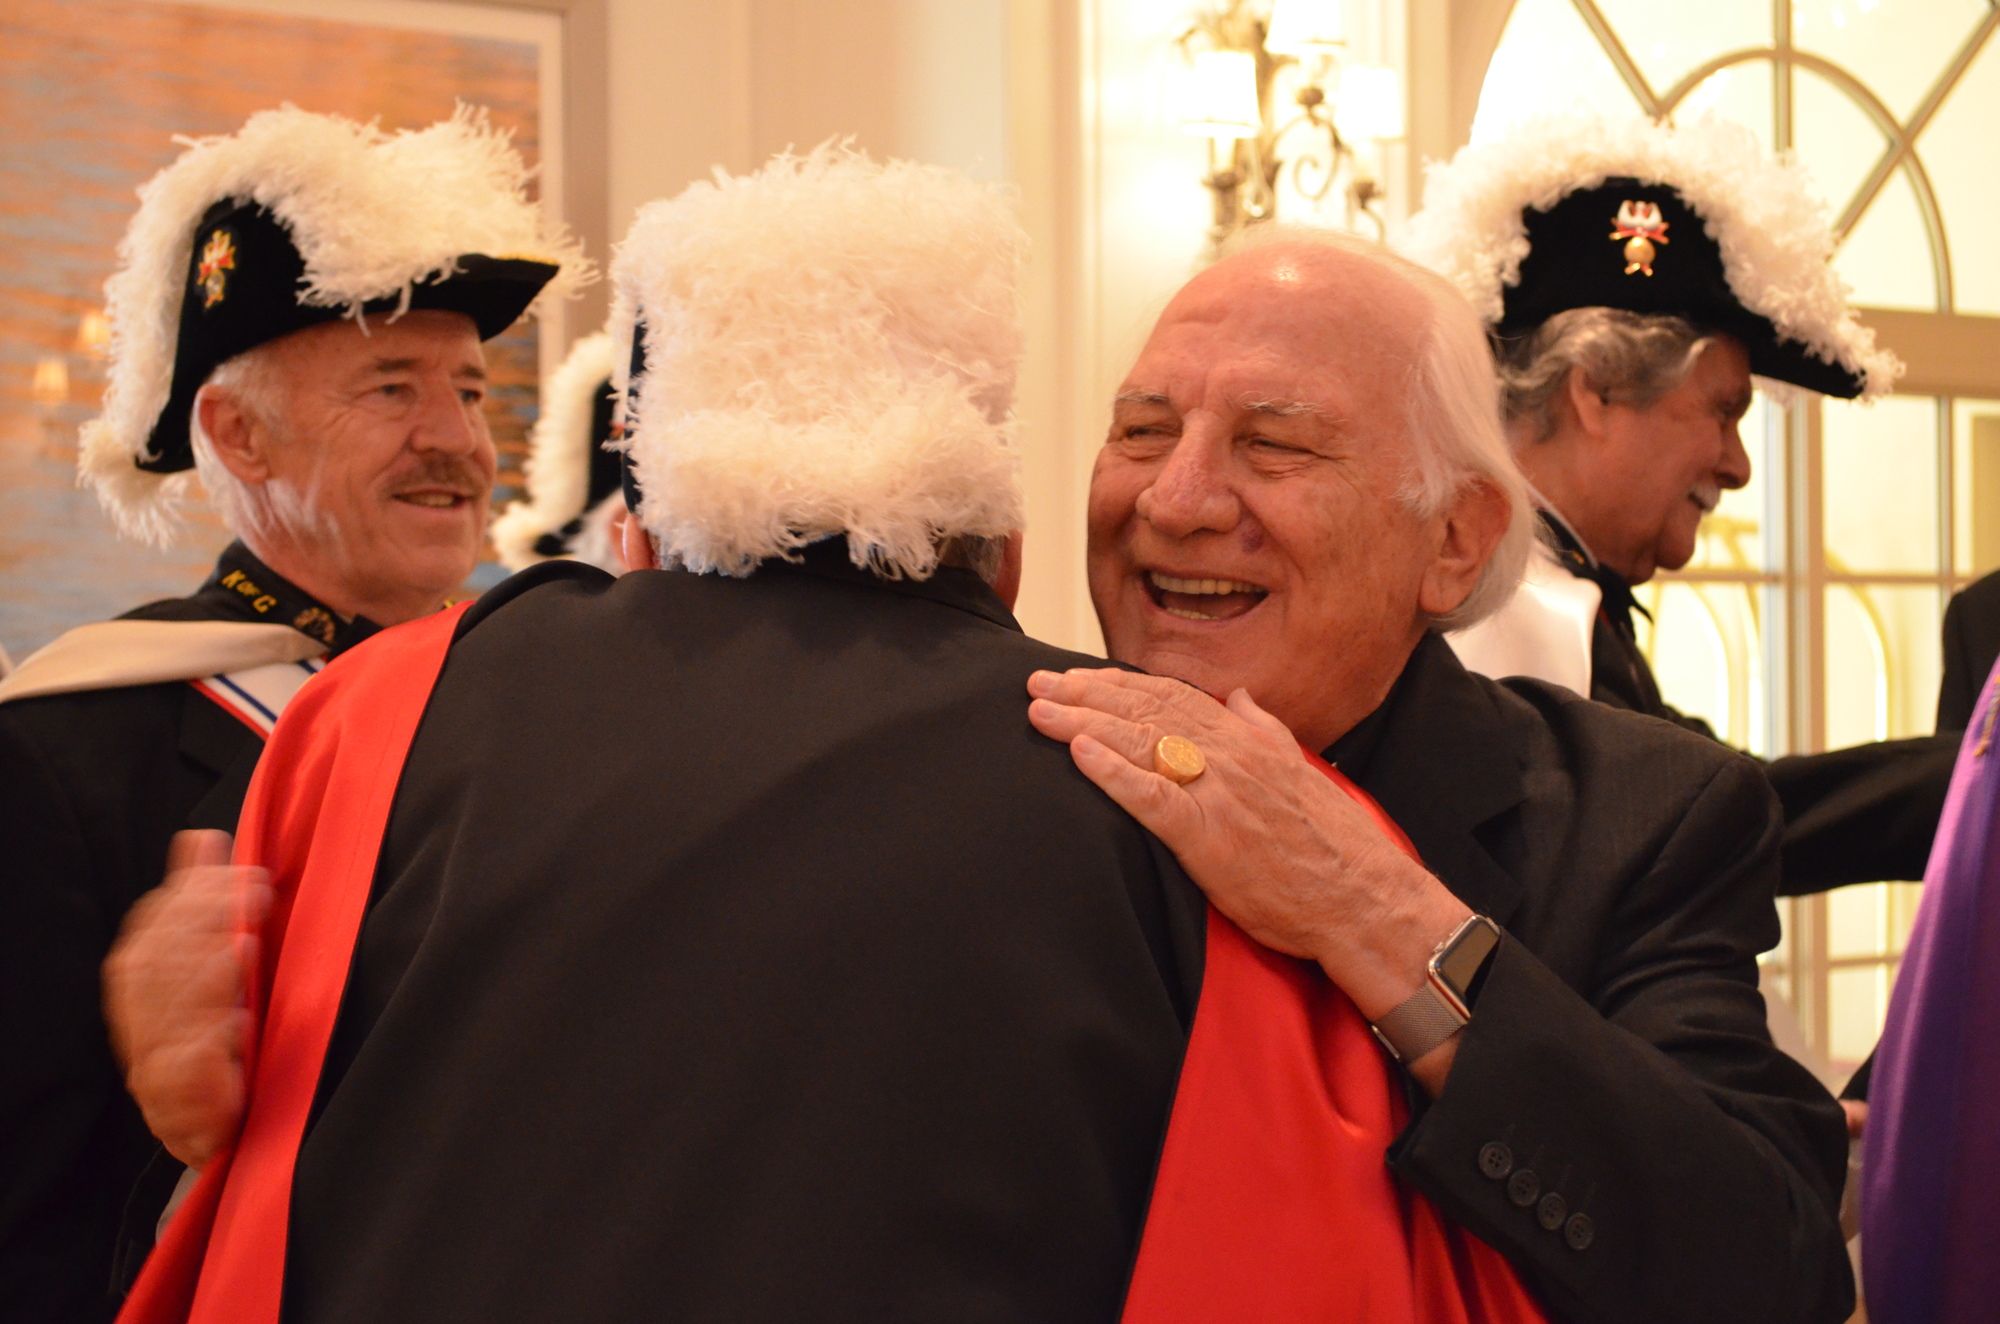 Father Fausto hugs and thanks Robert Morrissey of the Knights of Columbus for the entrance.